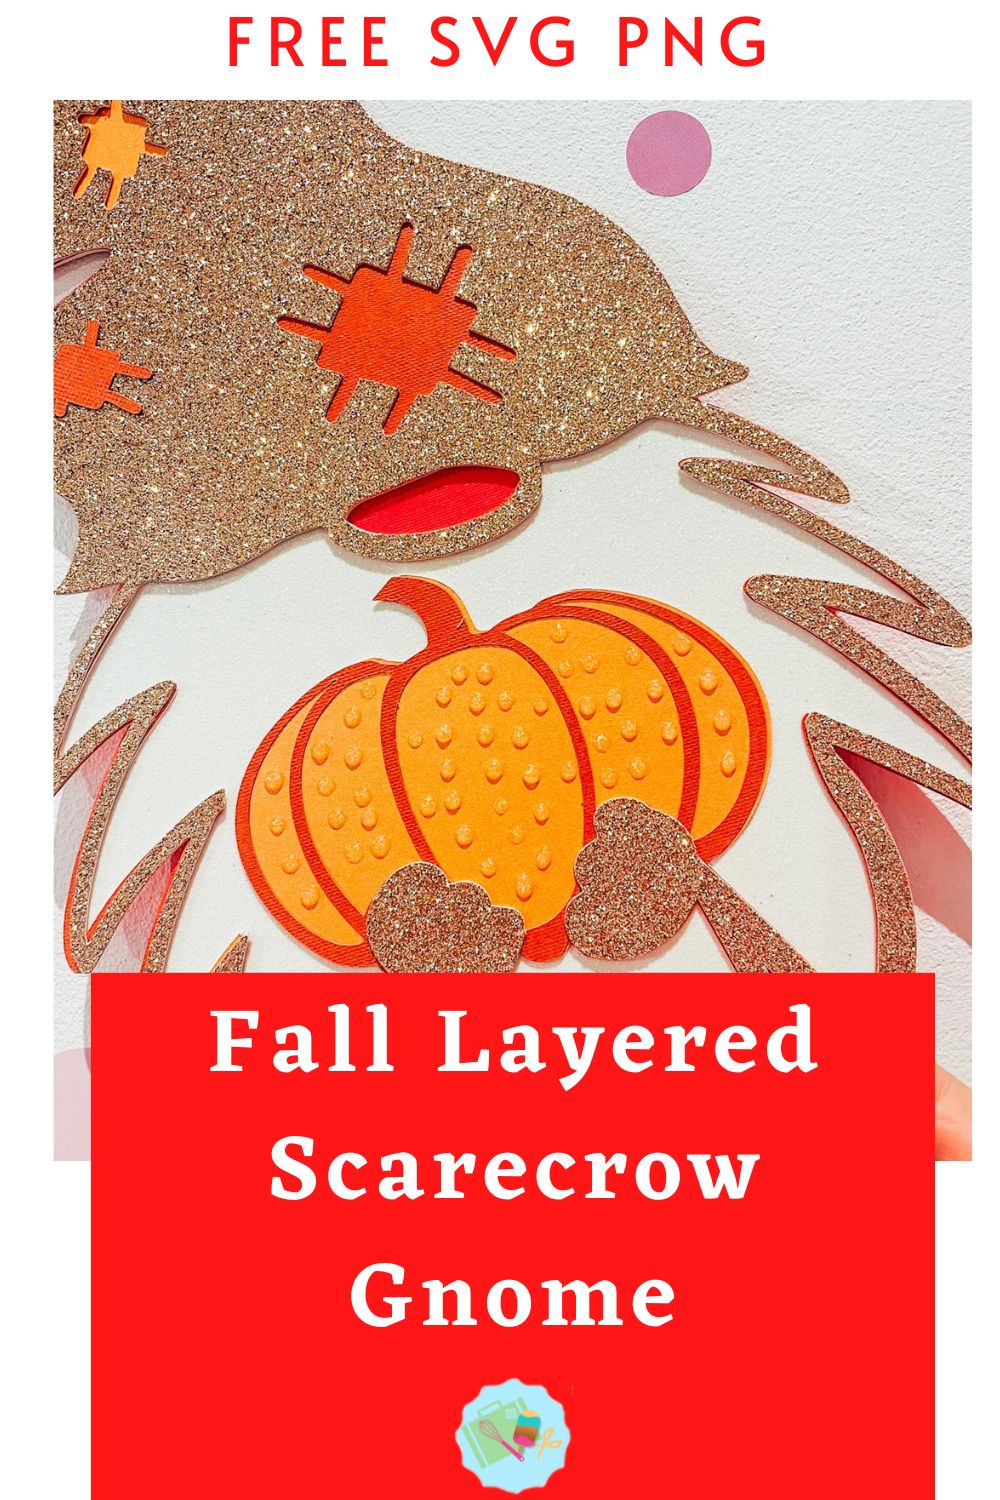 Free layered pumpkin gnome SVG, PNG for Cricut, Glowforge and Silhouette